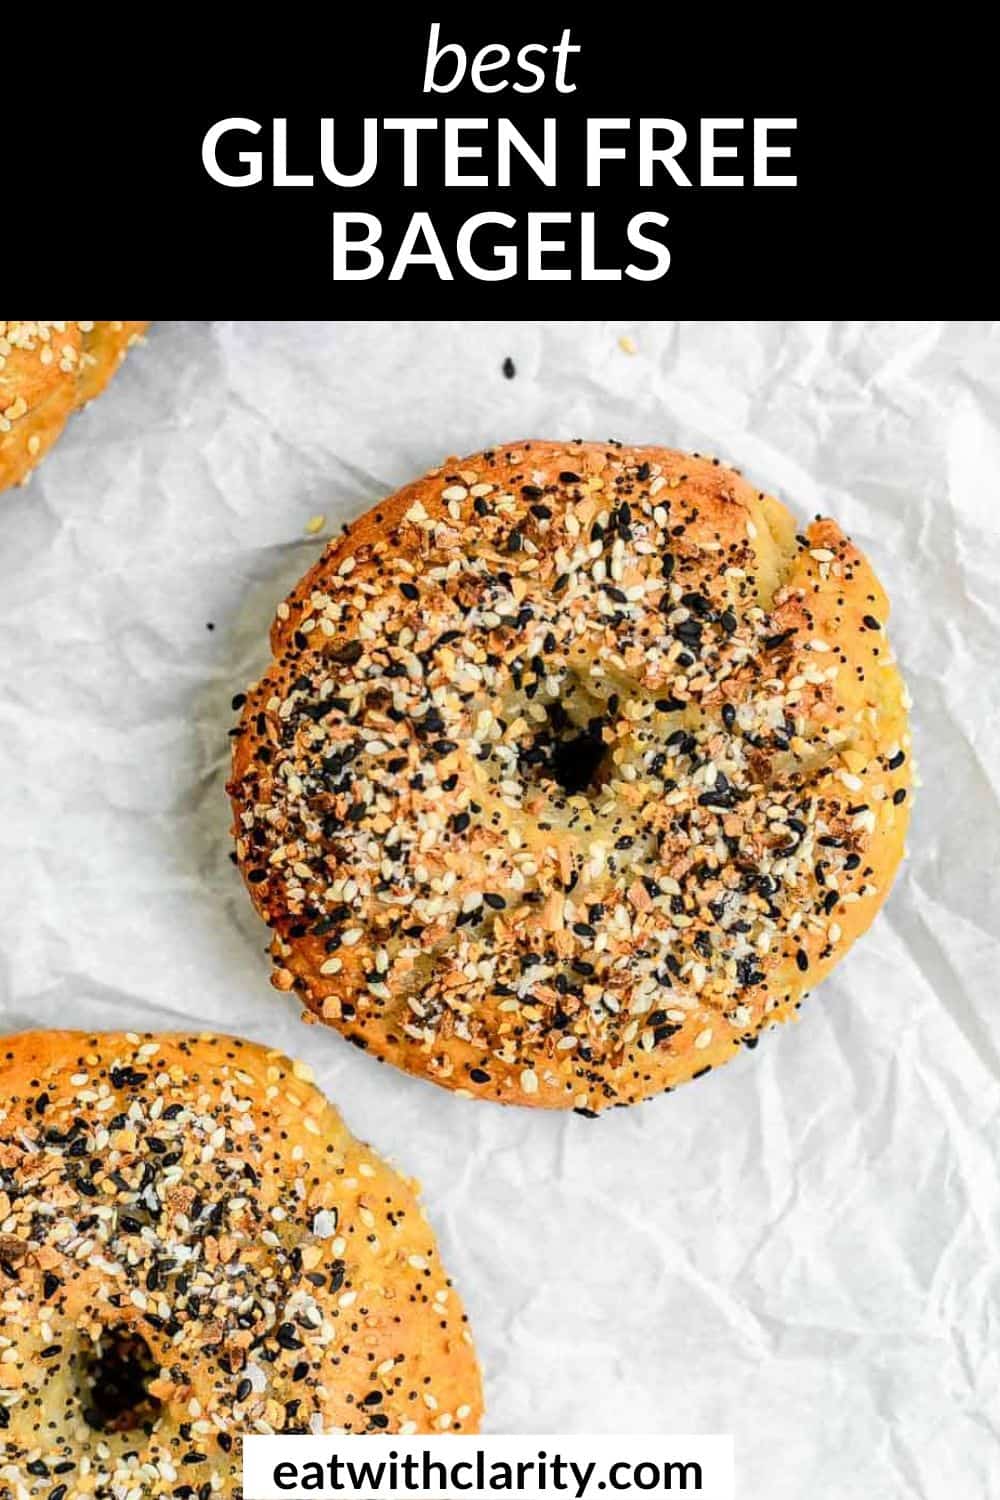 Best Gluten Free Bagels - Eat With Clarity